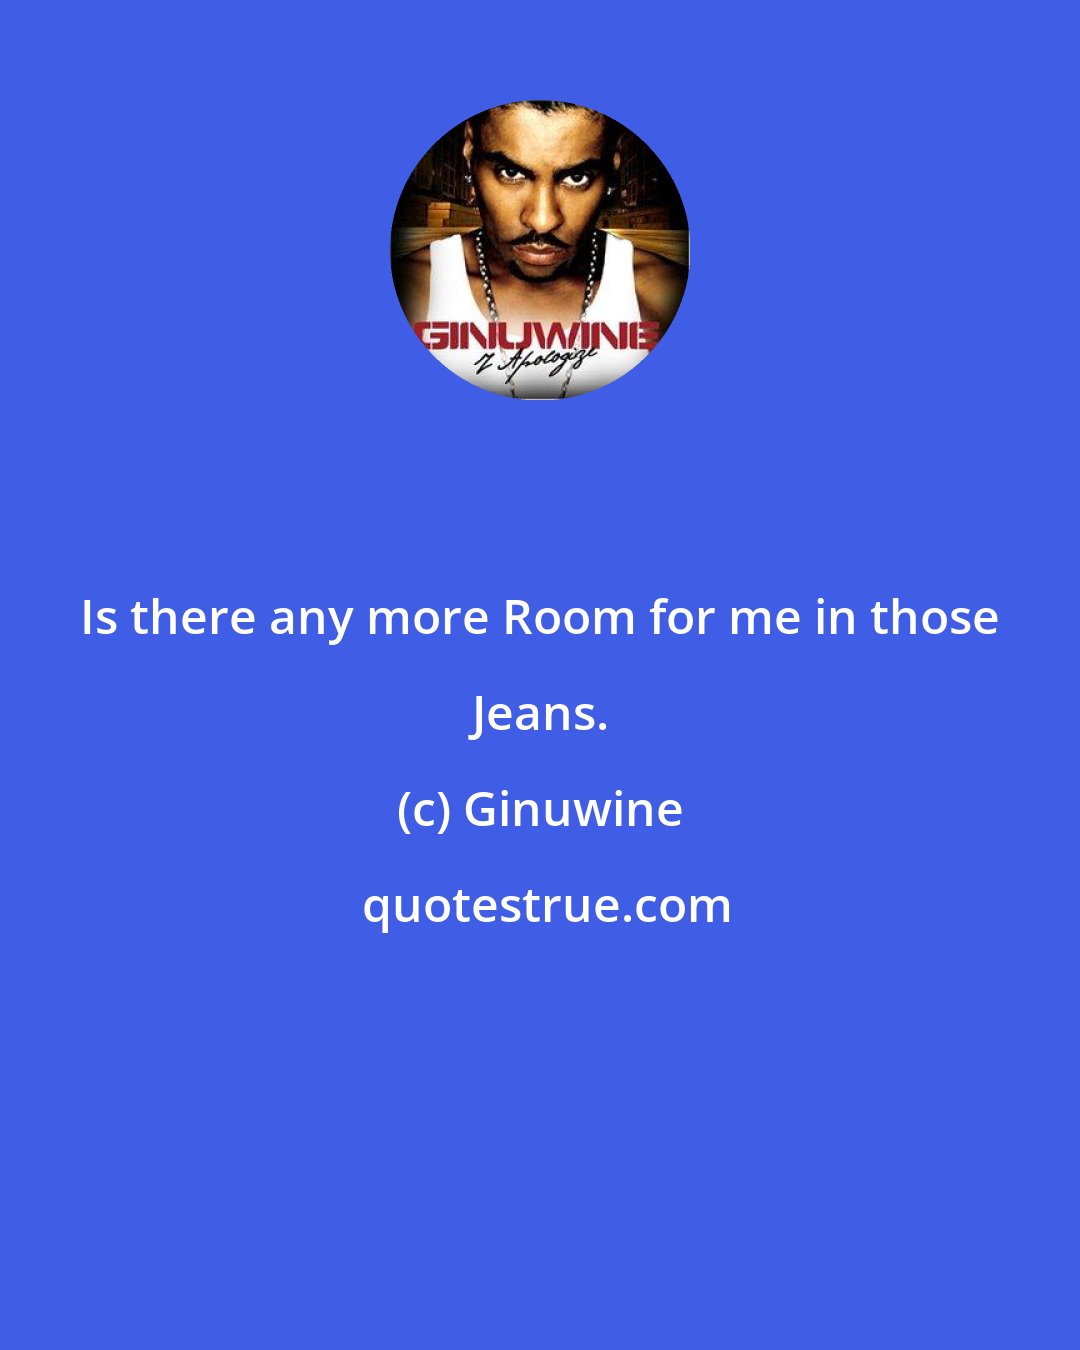 Ginuwine: Is there any more Room for me in those Jeans.